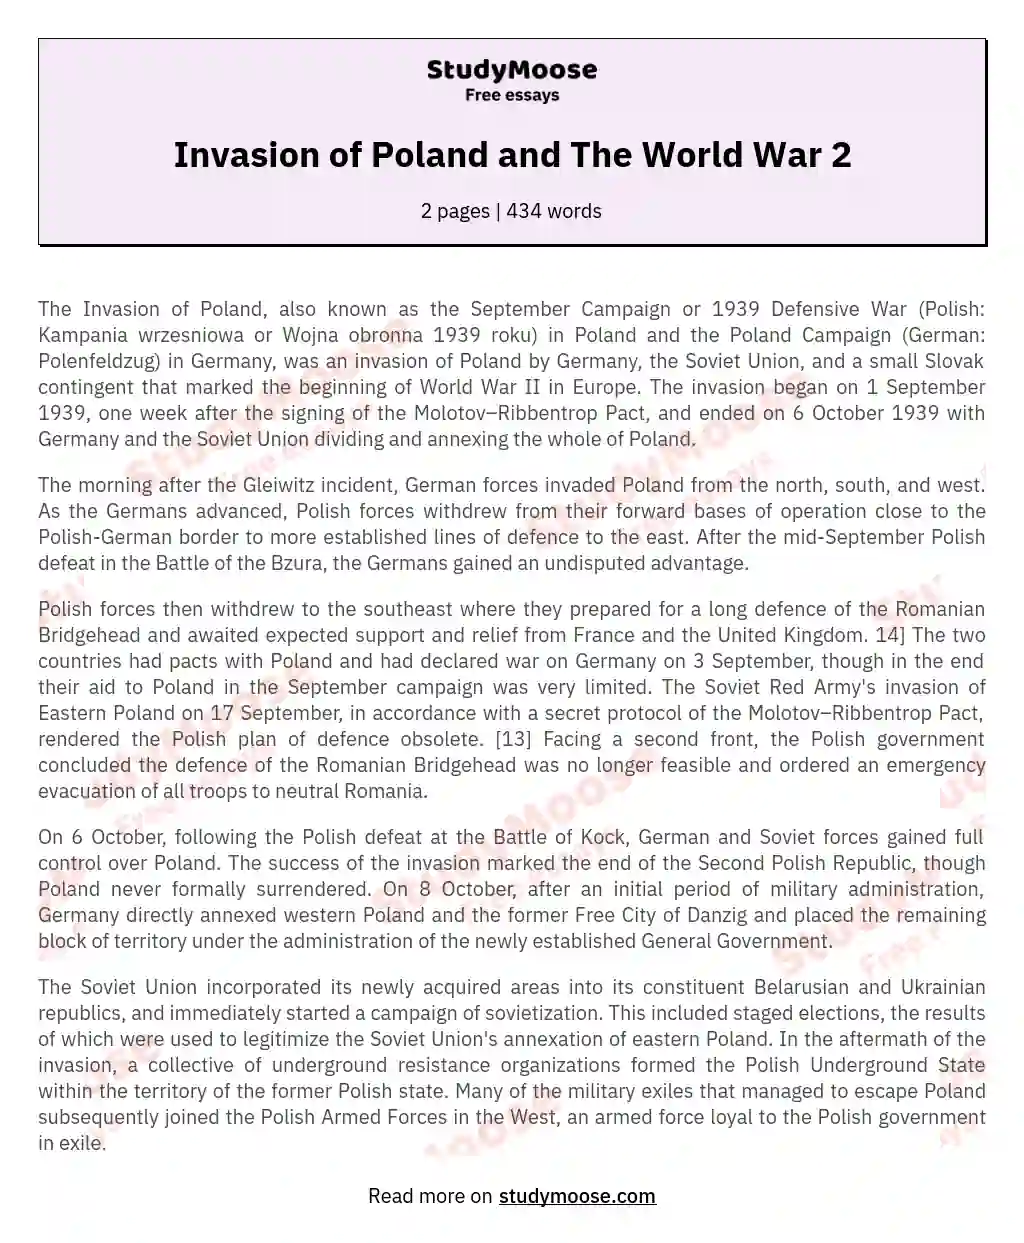 Invasion of Poland and The World War 2 essay